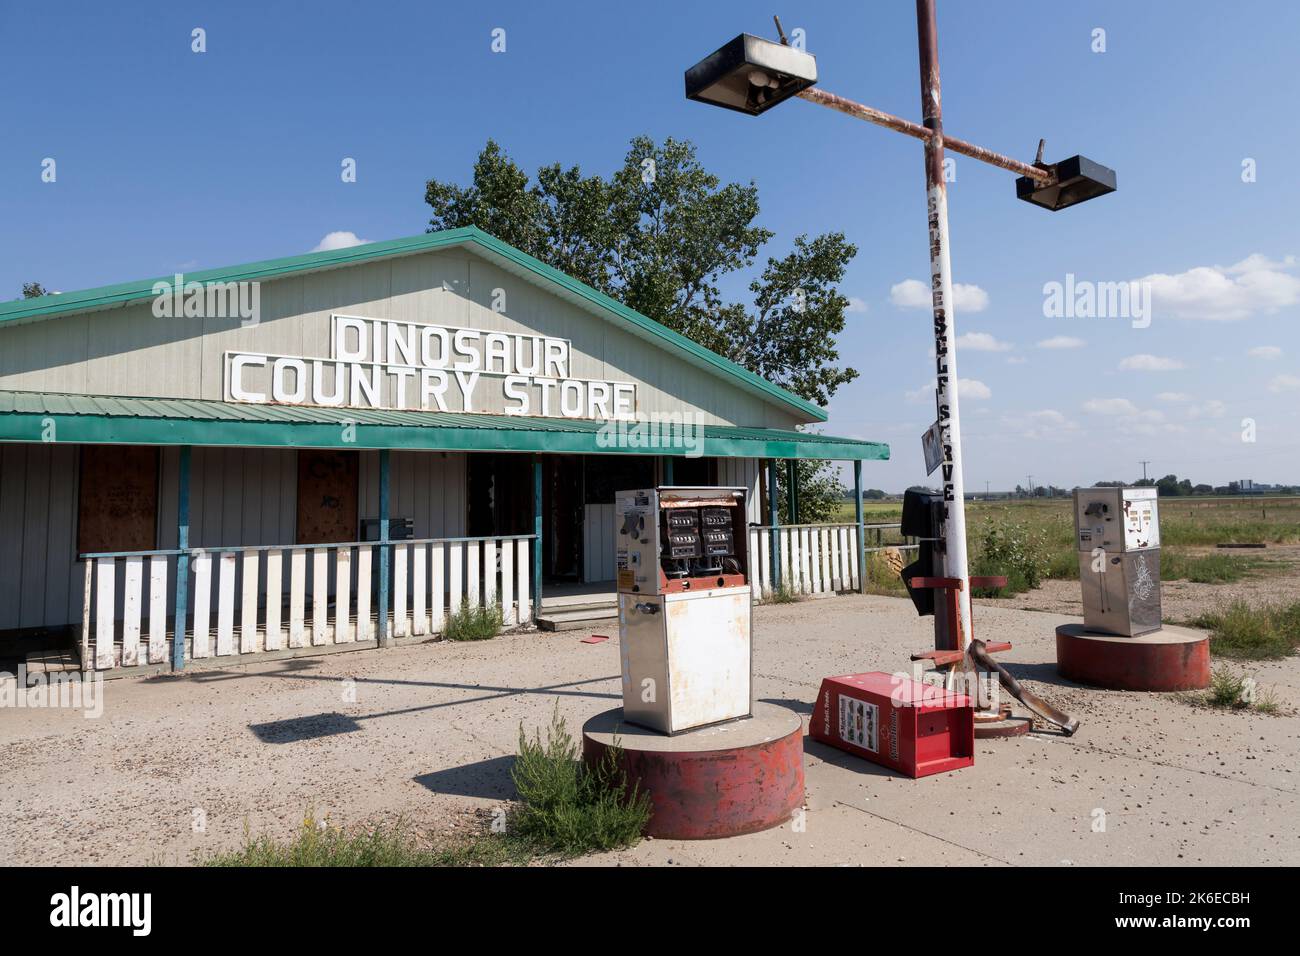 Gas pumps sit unused at the abandoned Dinosaur Country Store near Brooks, Alberta, Canada. Stock Photo